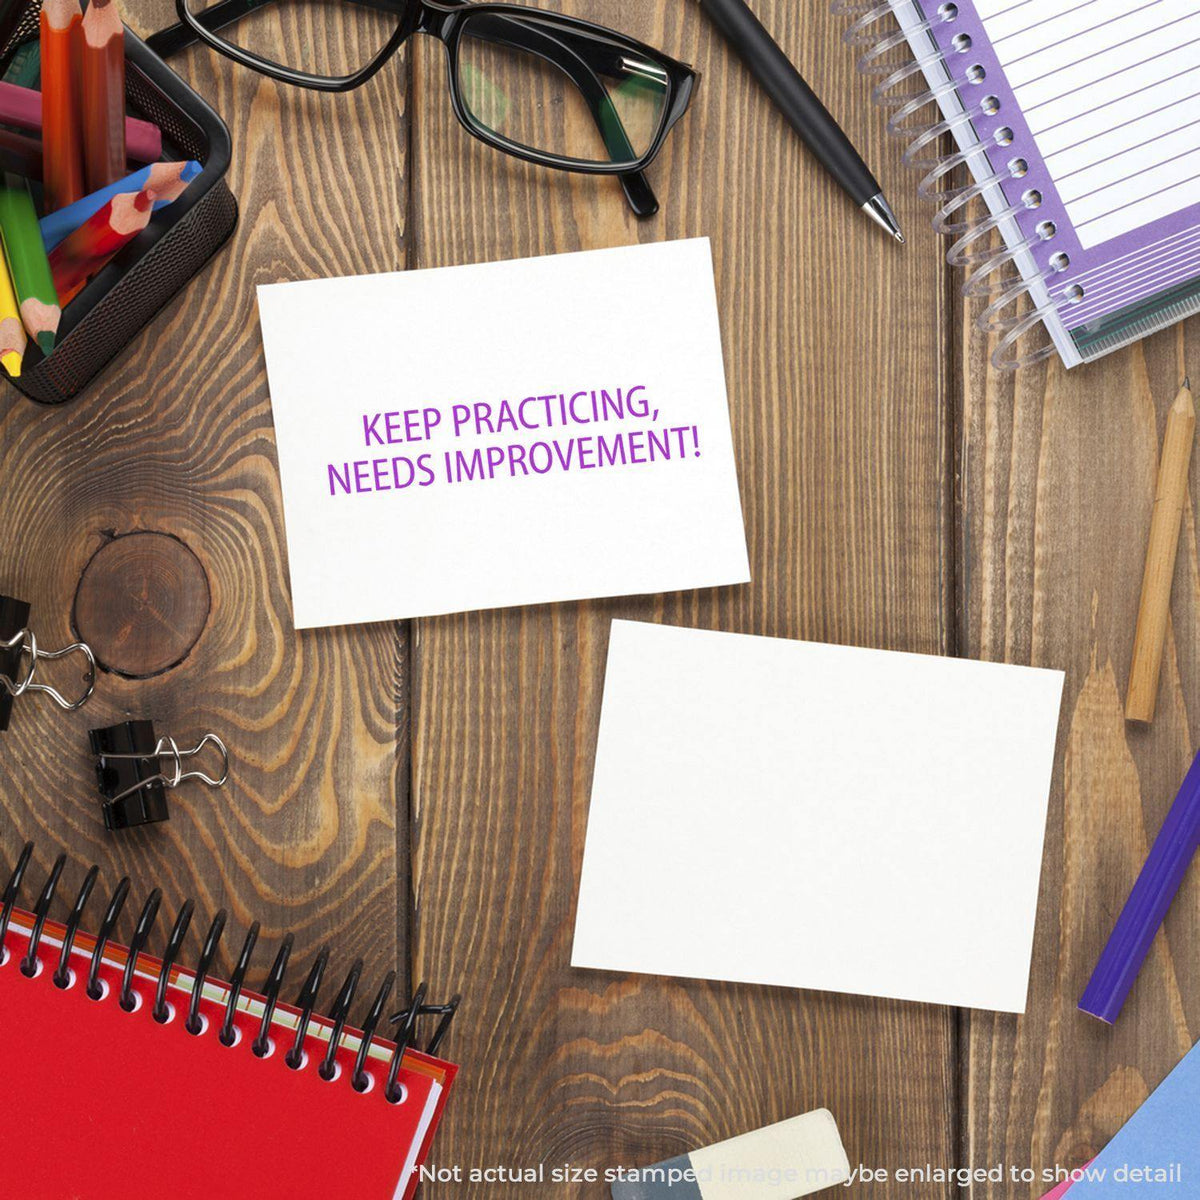 Keep Practicing Needs Improvement Rubber Stamp In Use Photo